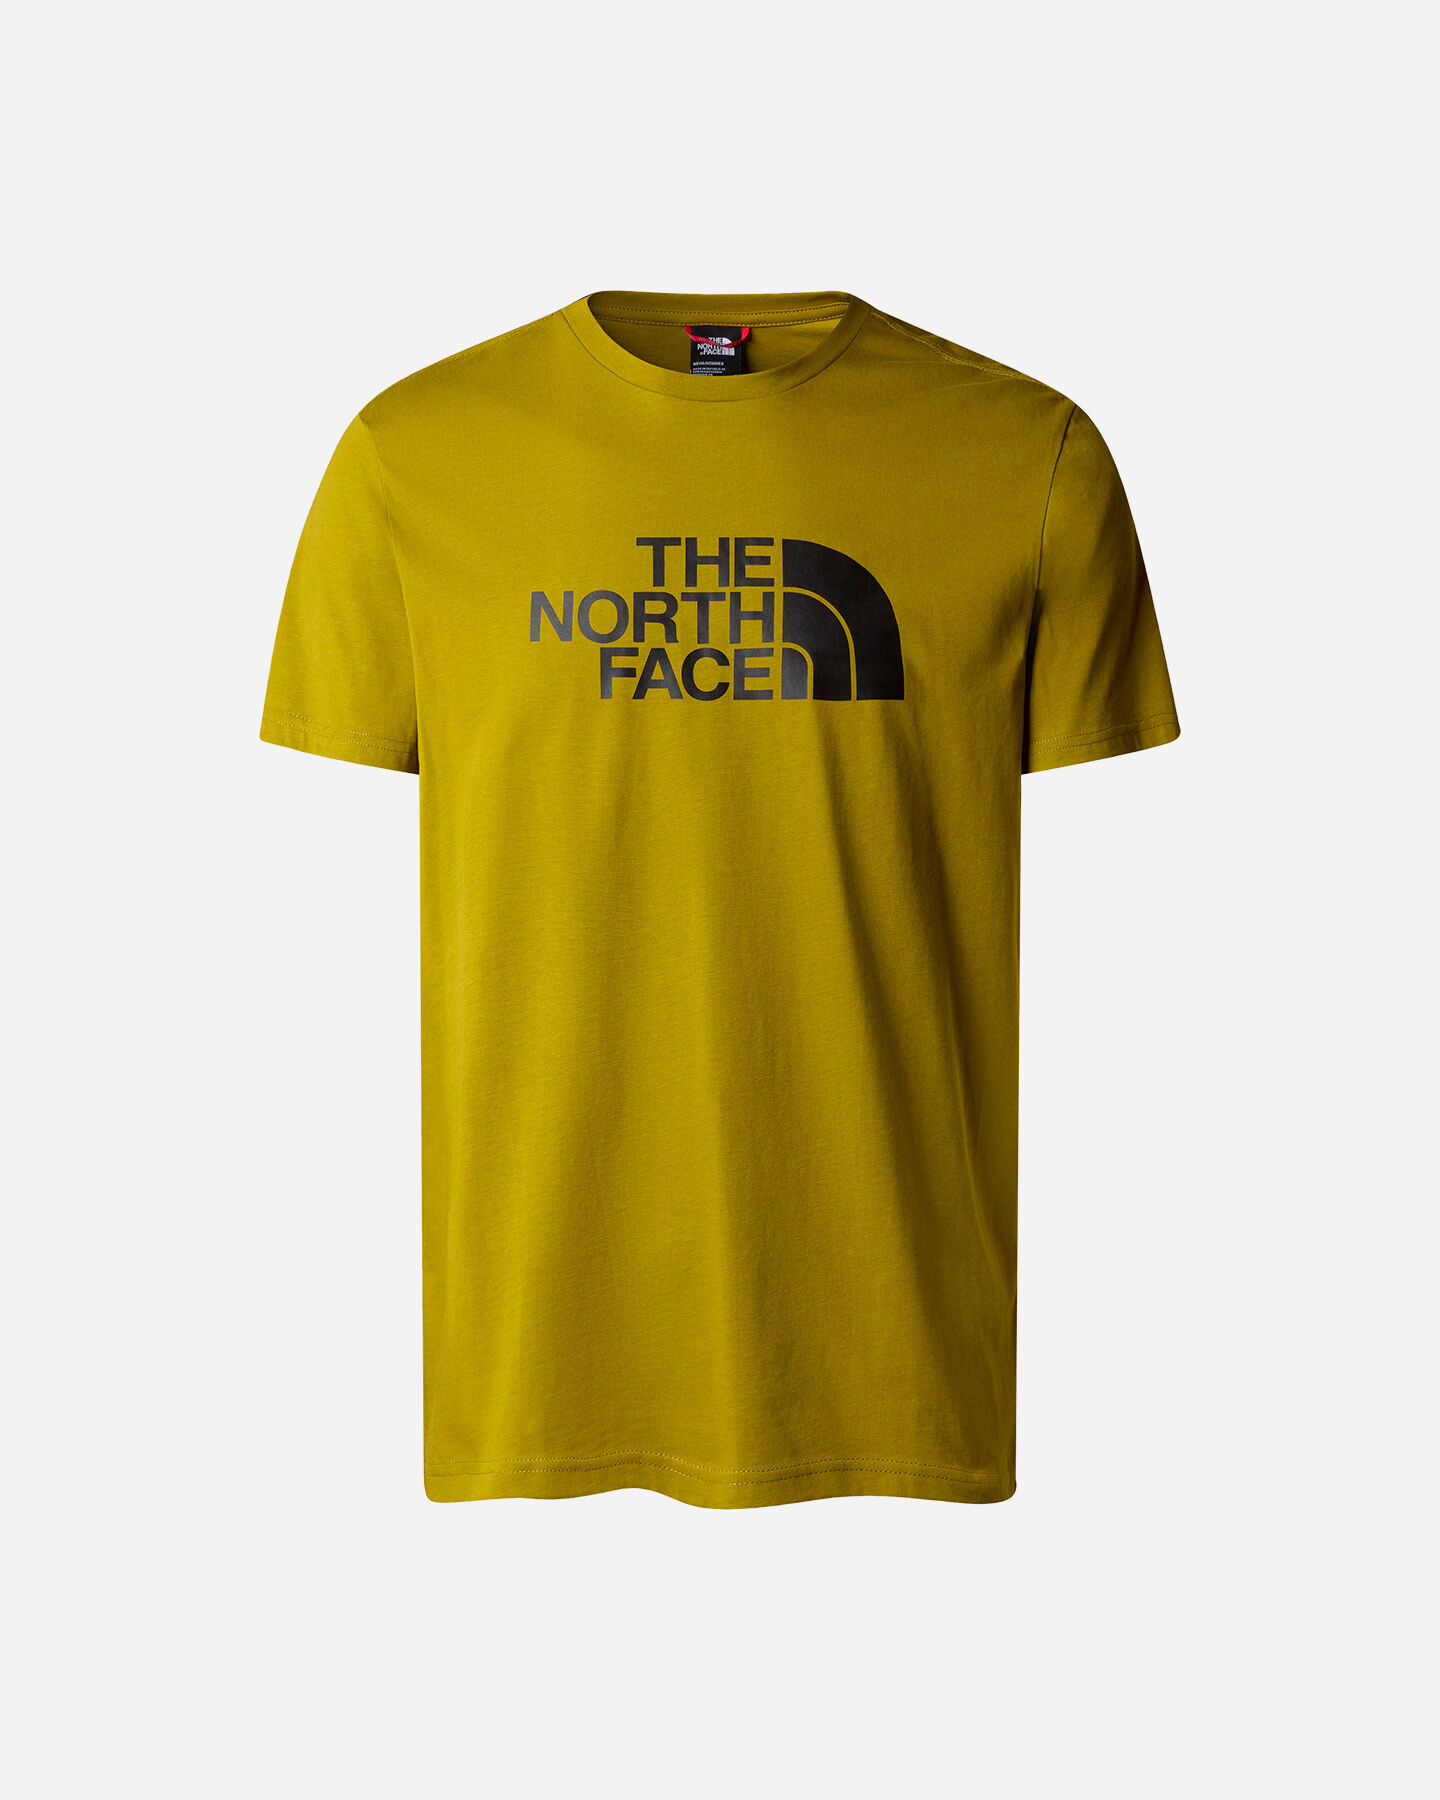  T-Shirt THE NORTH FACE EASY M S5597505|I0N|XS scatto 0